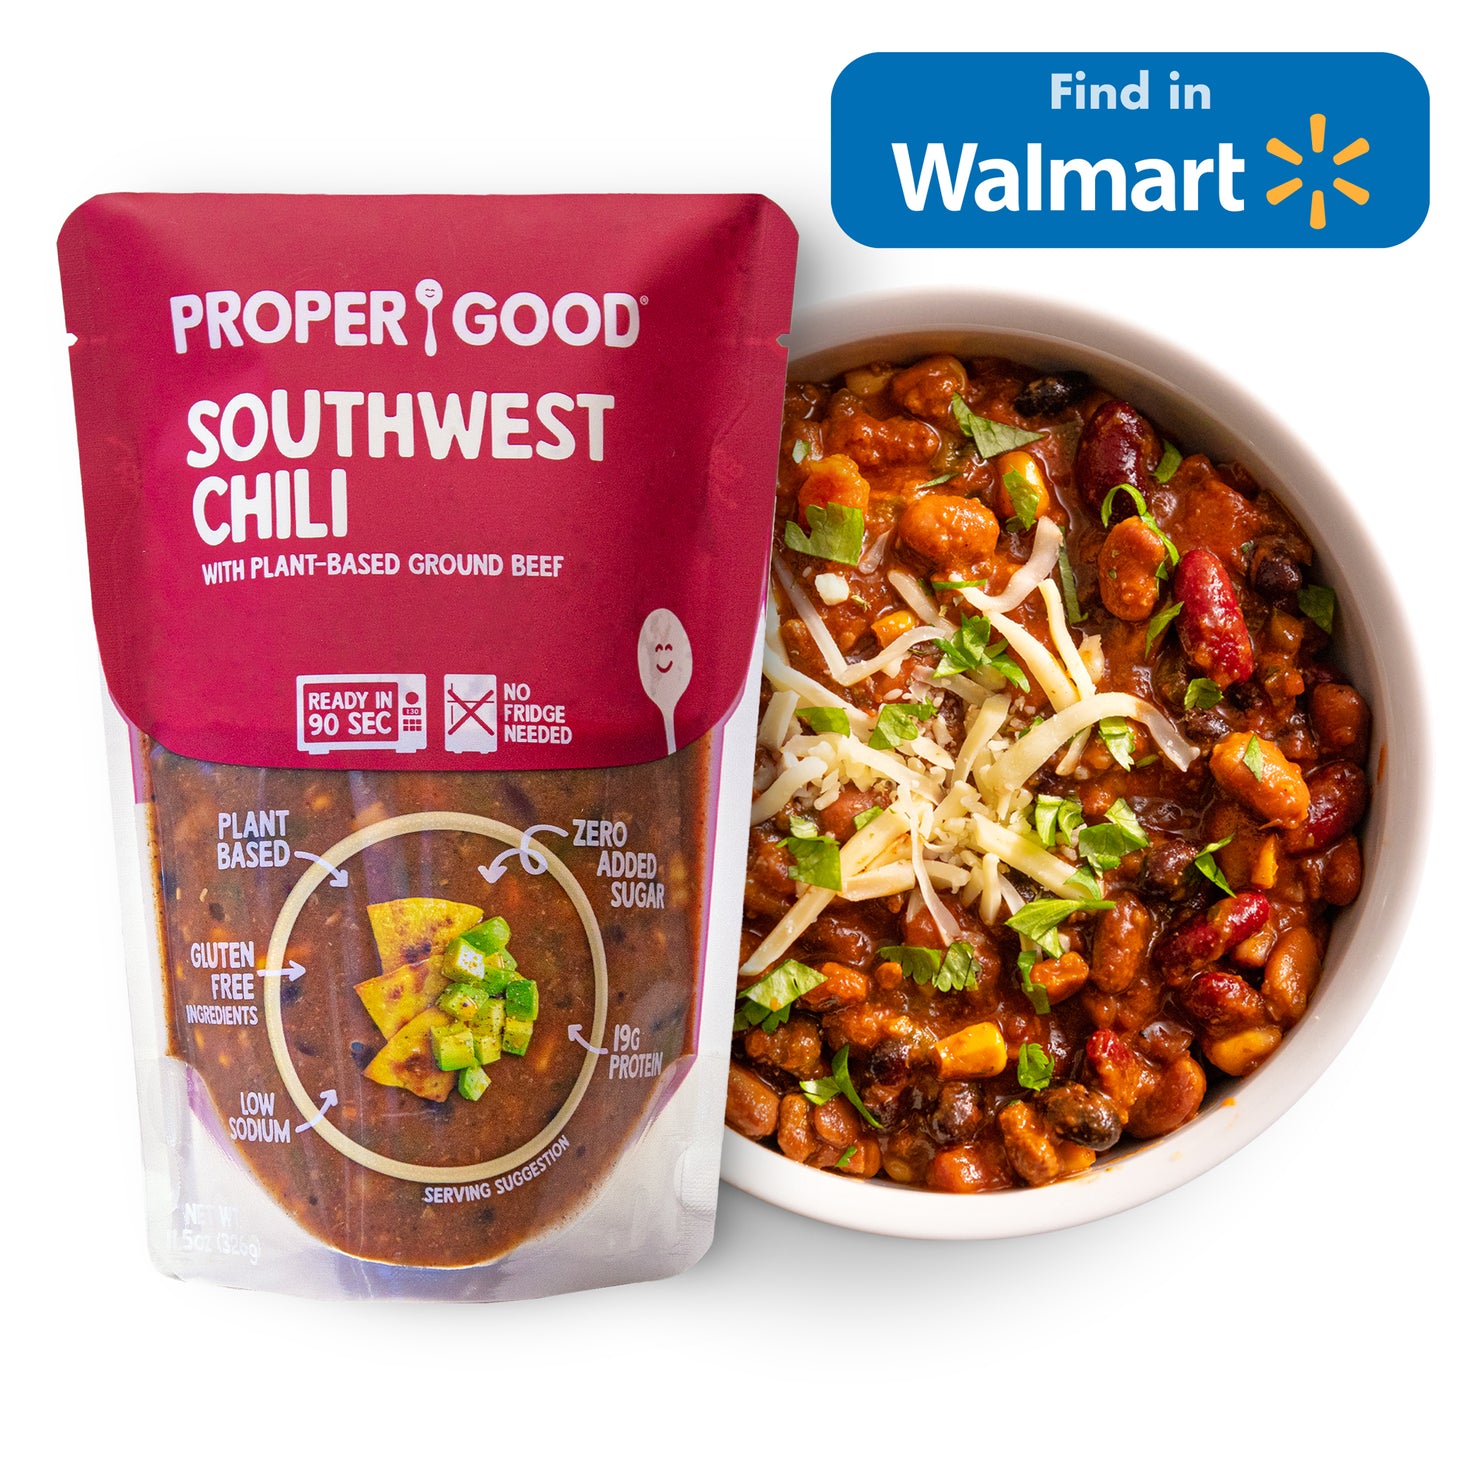 Southwest Chili in Bowl and in Pouch - Find in Walmart - Eat Proper Good